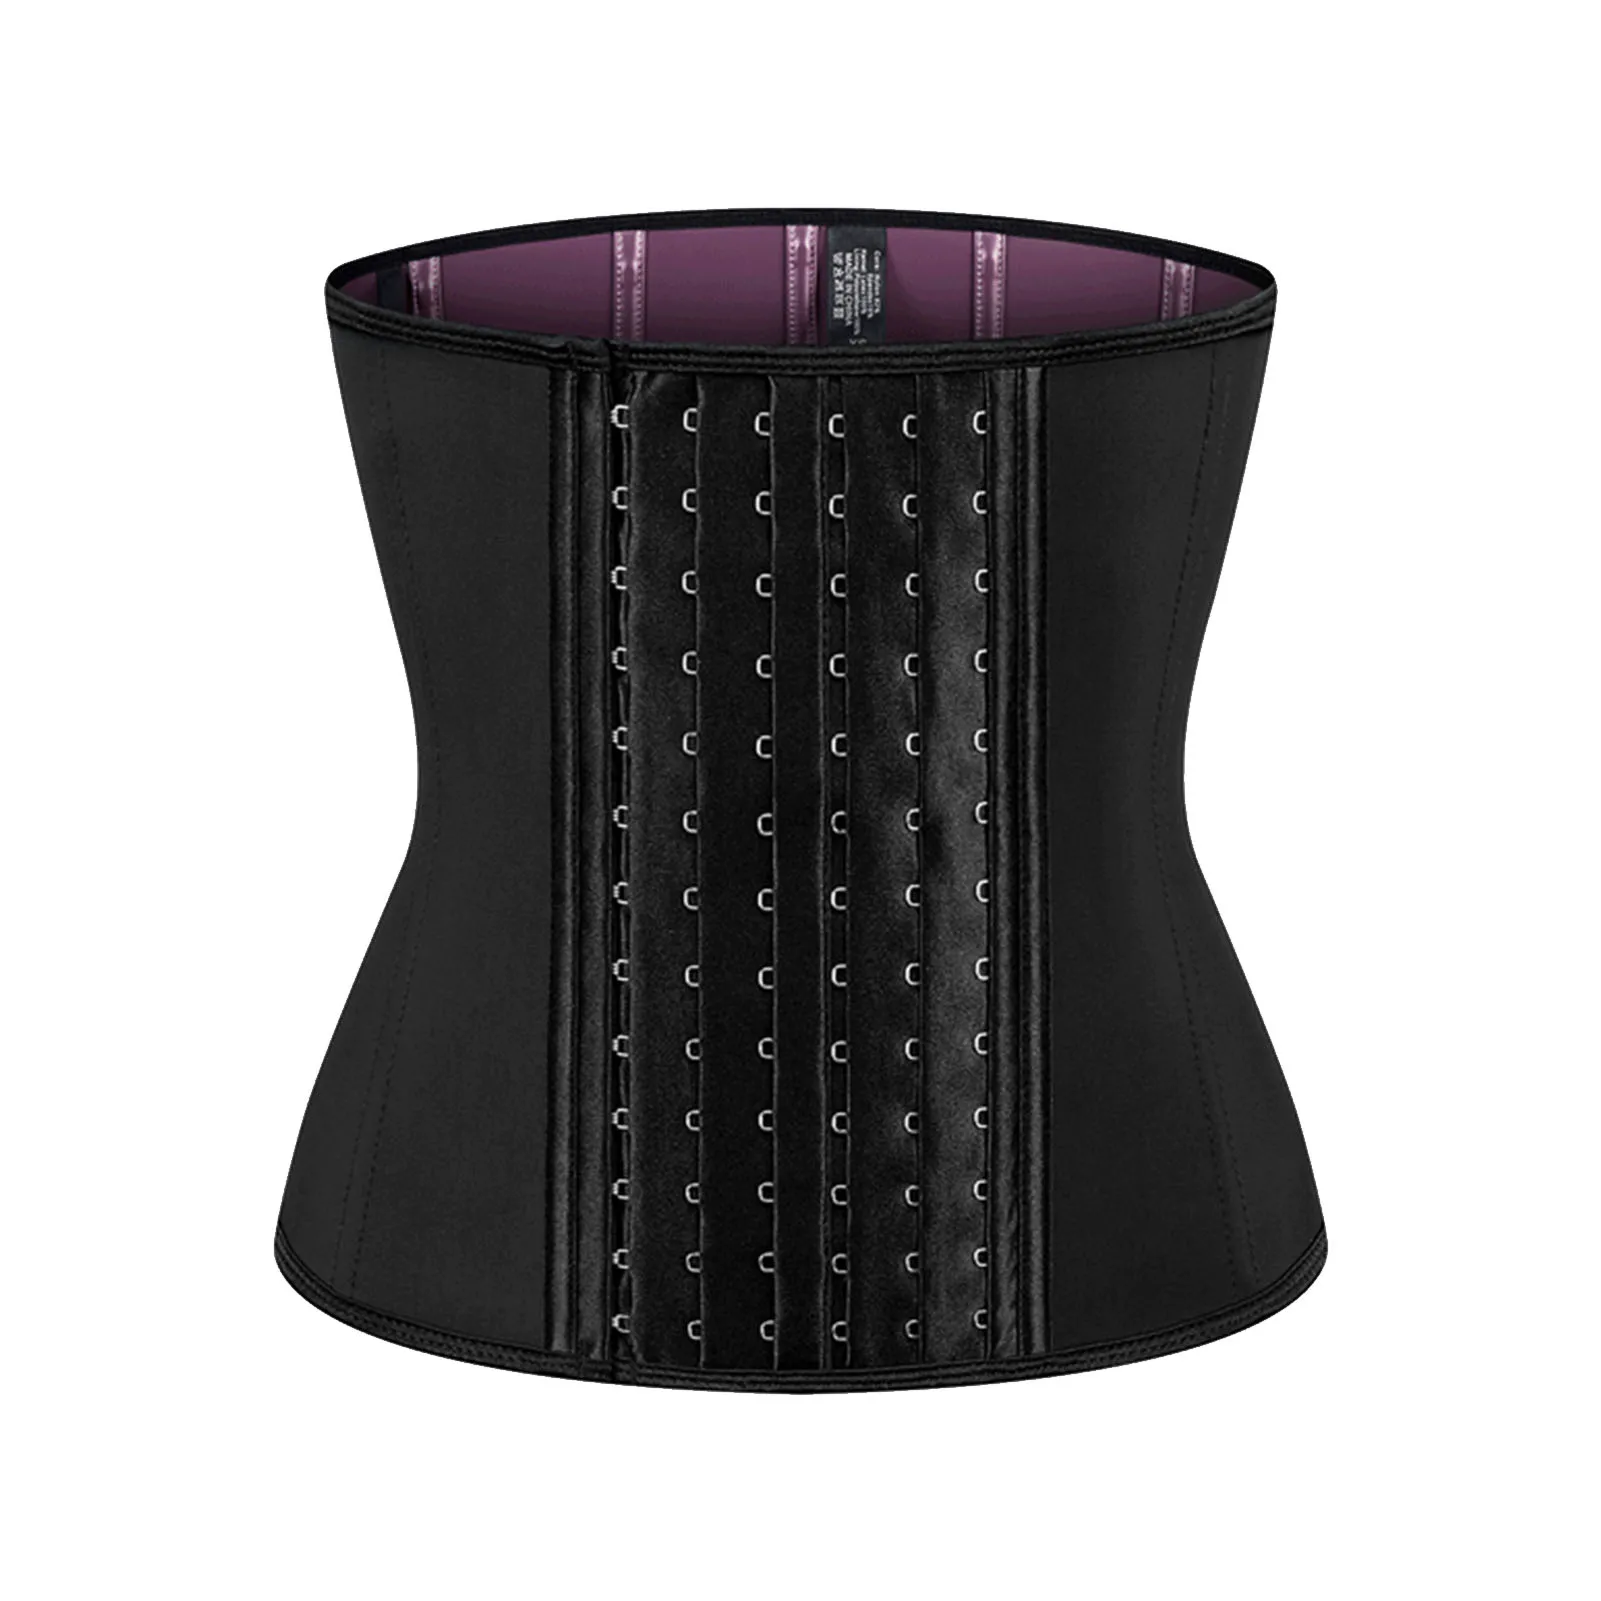 

Waist Trainer Corsets For Weight Loss Women Trimmer Slimmer Belt Latex Corset With 6 Rows Of Buckles Corset Cincher Body Shaper